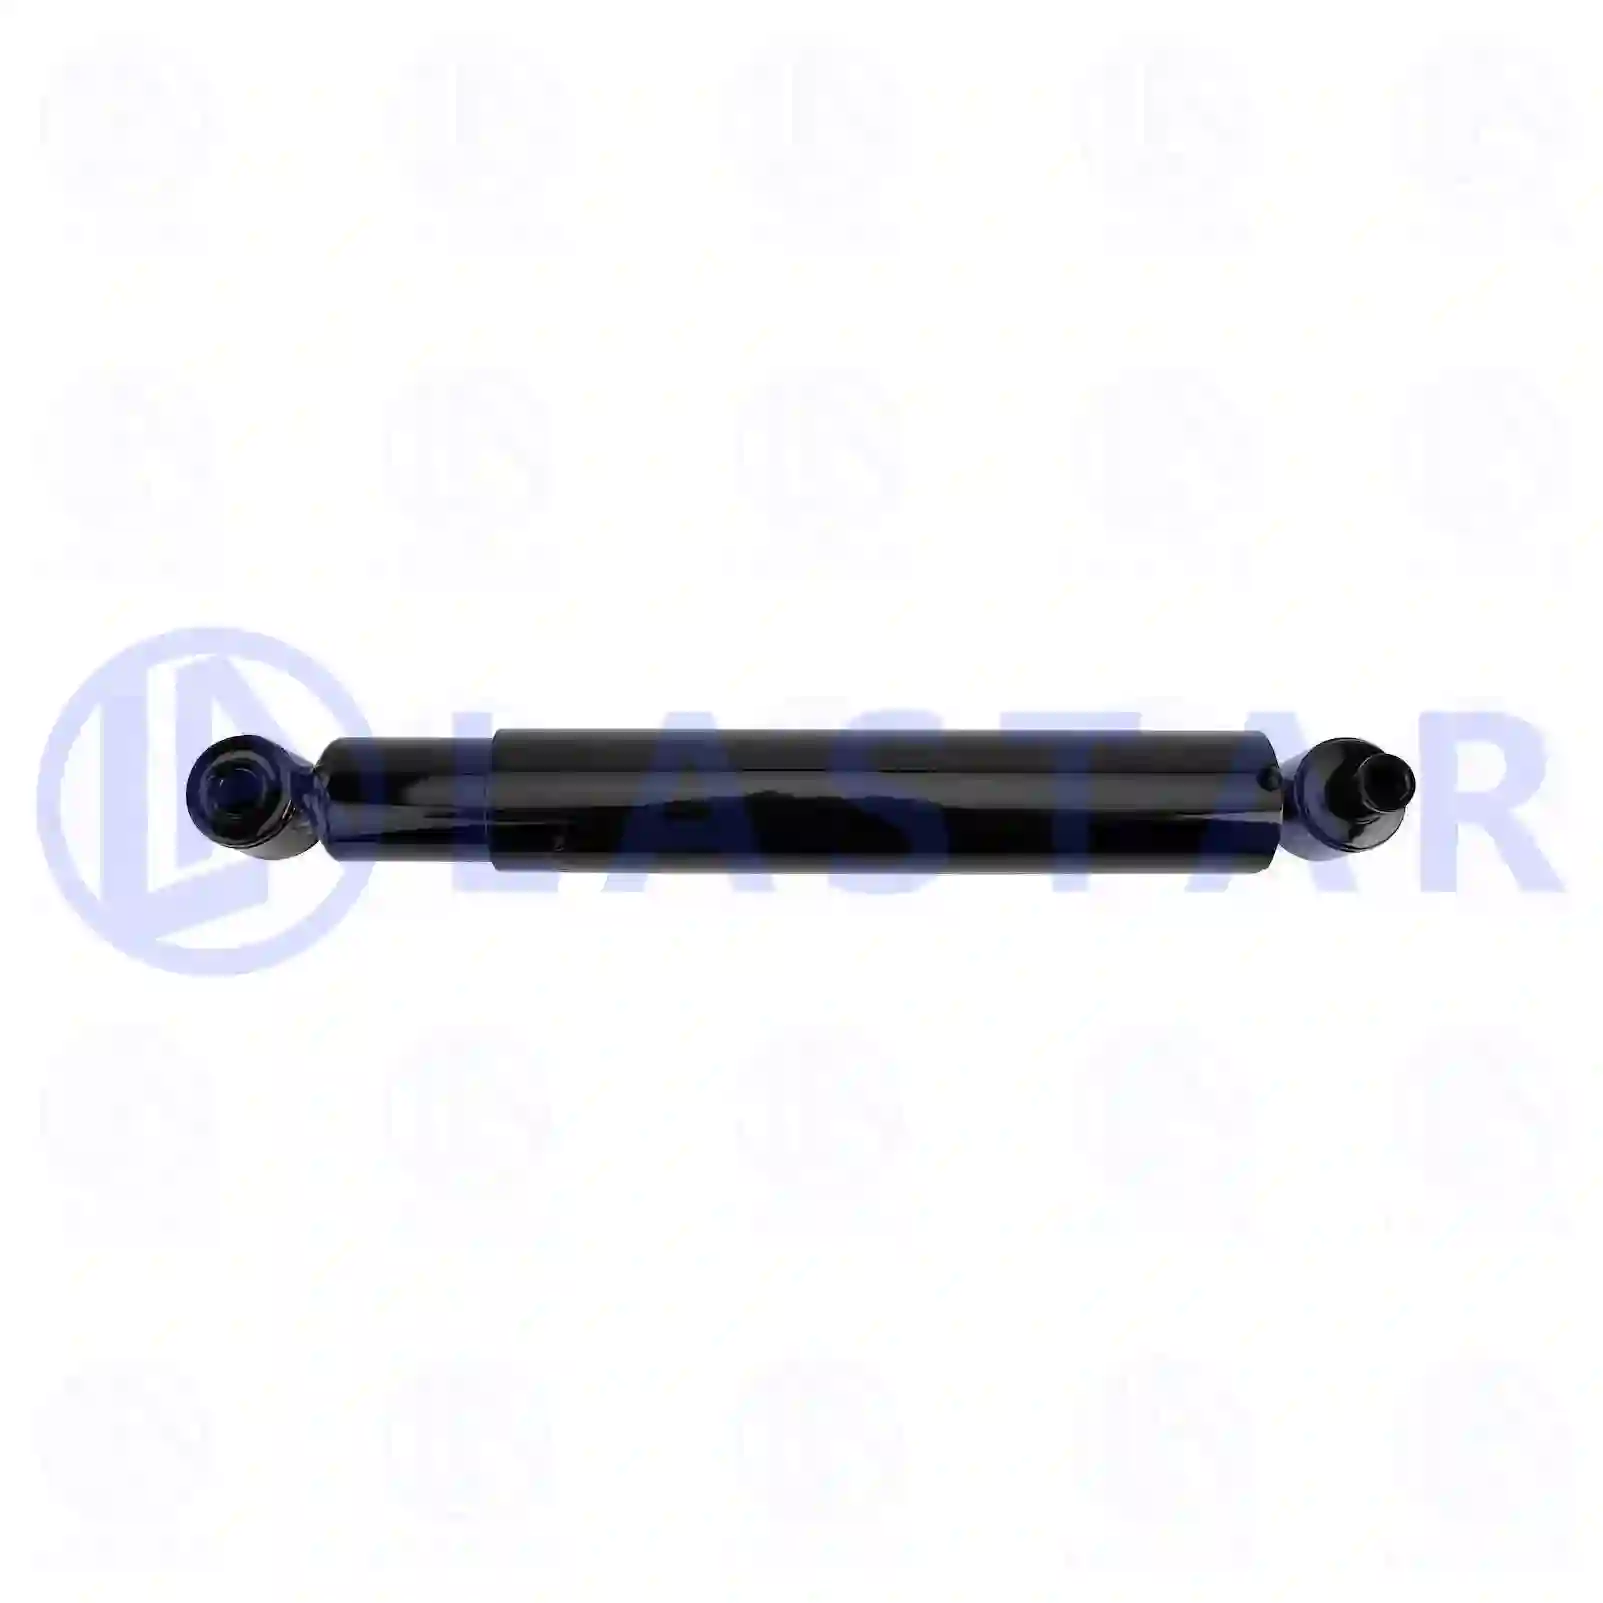 Shock absorber, 77727833, 0053261000, , , , ||  77727833 Lastar Spare Part | Truck Spare Parts, Auotomotive Spare Parts Shock absorber, 77727833, 0053261000, , , , ||  77727833 Lastar Spare Part | Truck Spare Parts, Auotomotive Spare Parts